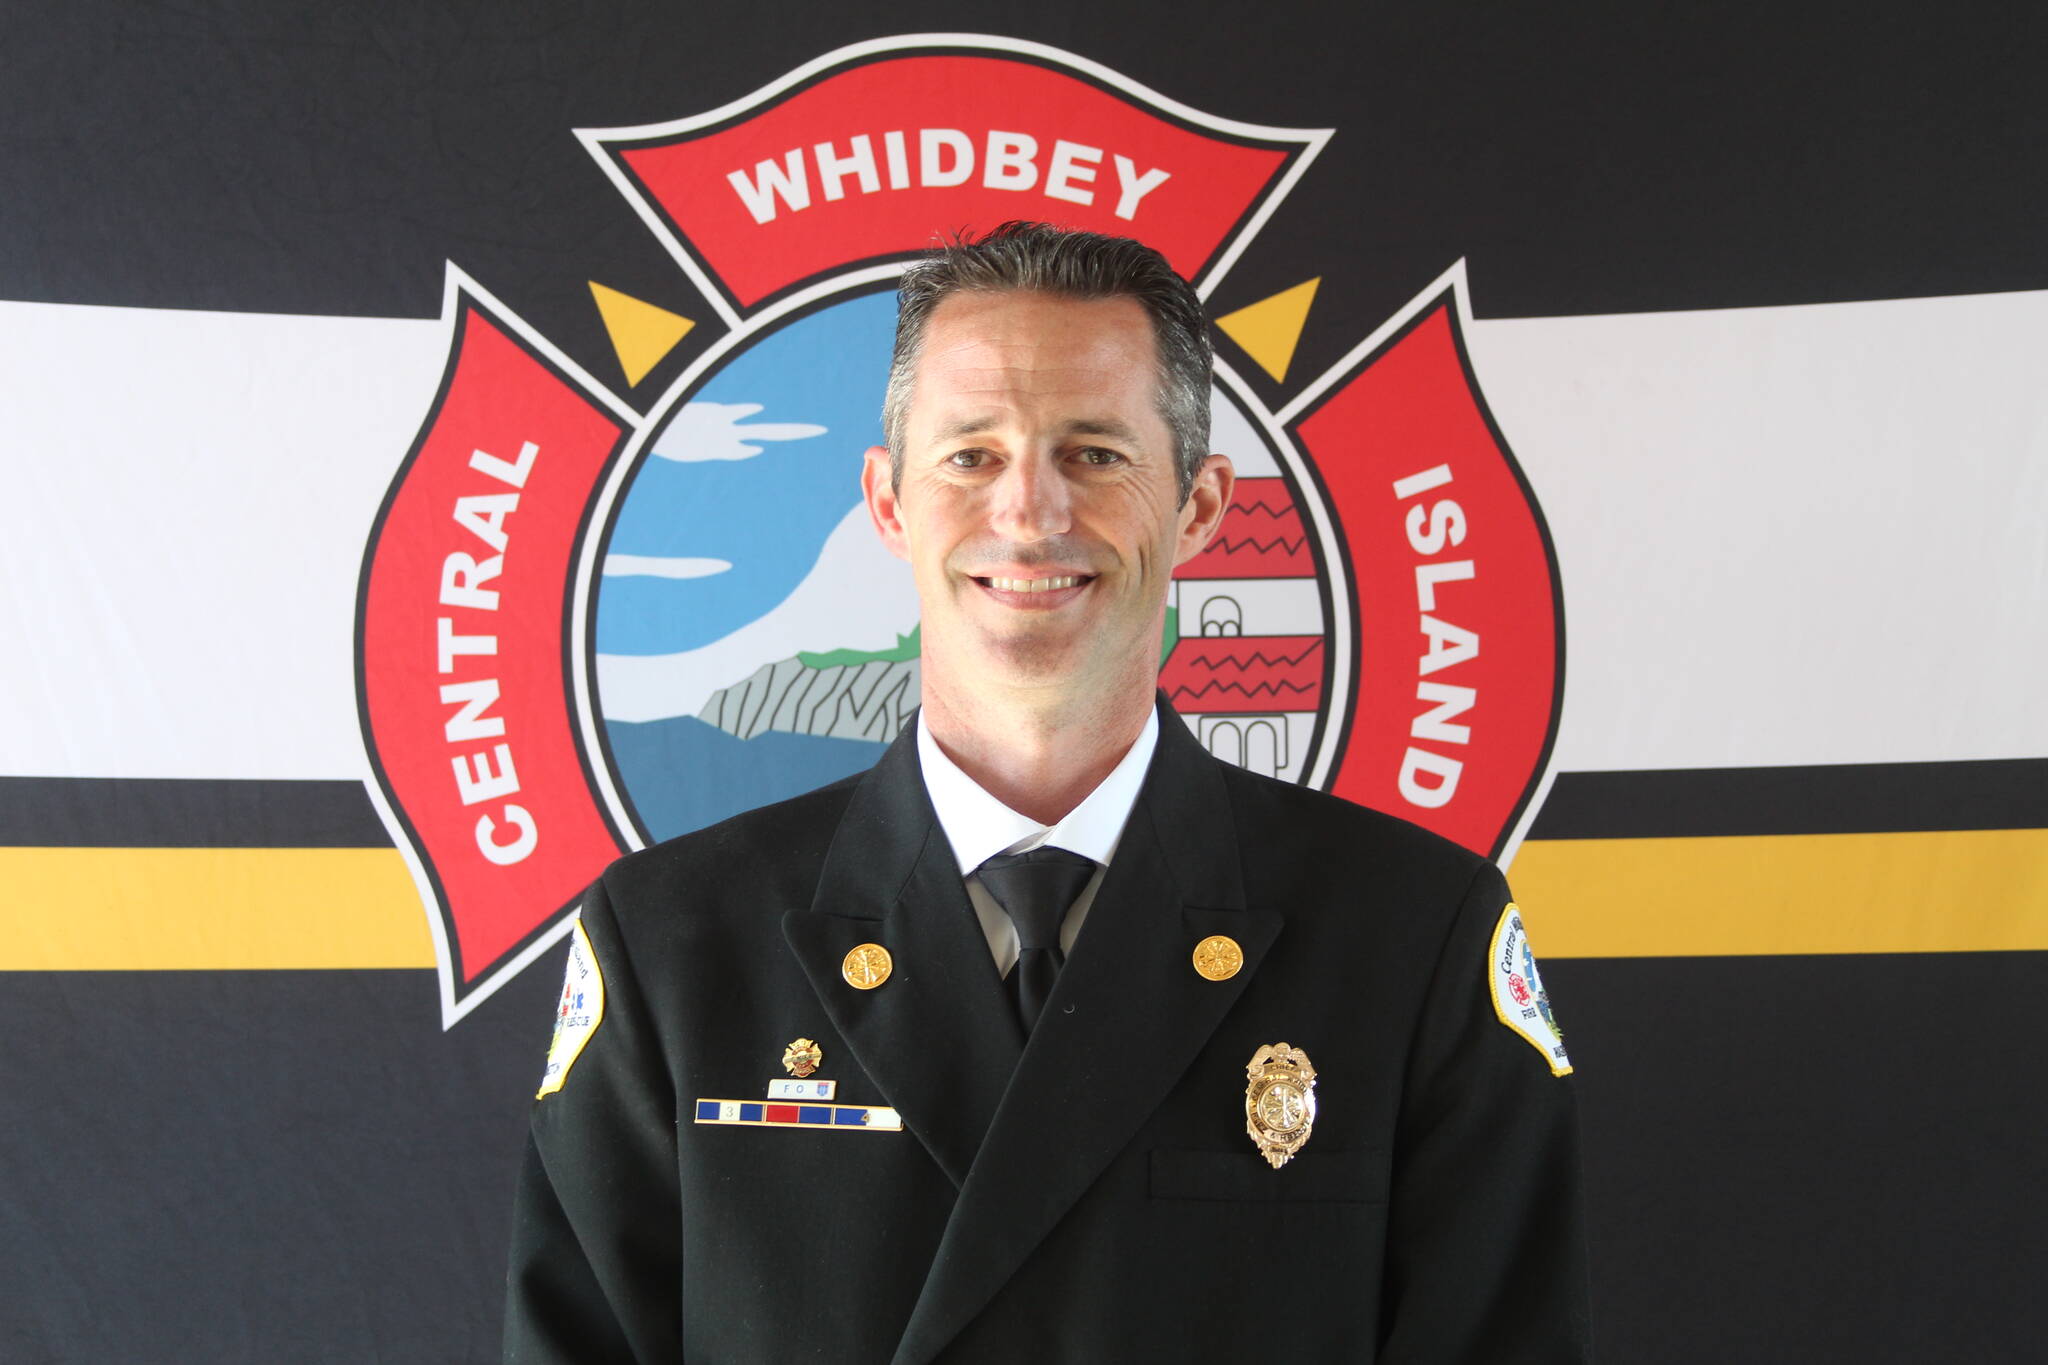 Longtime Central Whidbey Island Fire and Rescue firefighter Jerry Helm was sworn in as chief for the district at the fire station in Greenbank May 16. (Photo by Karina Andrew/Whidbey News-Times)